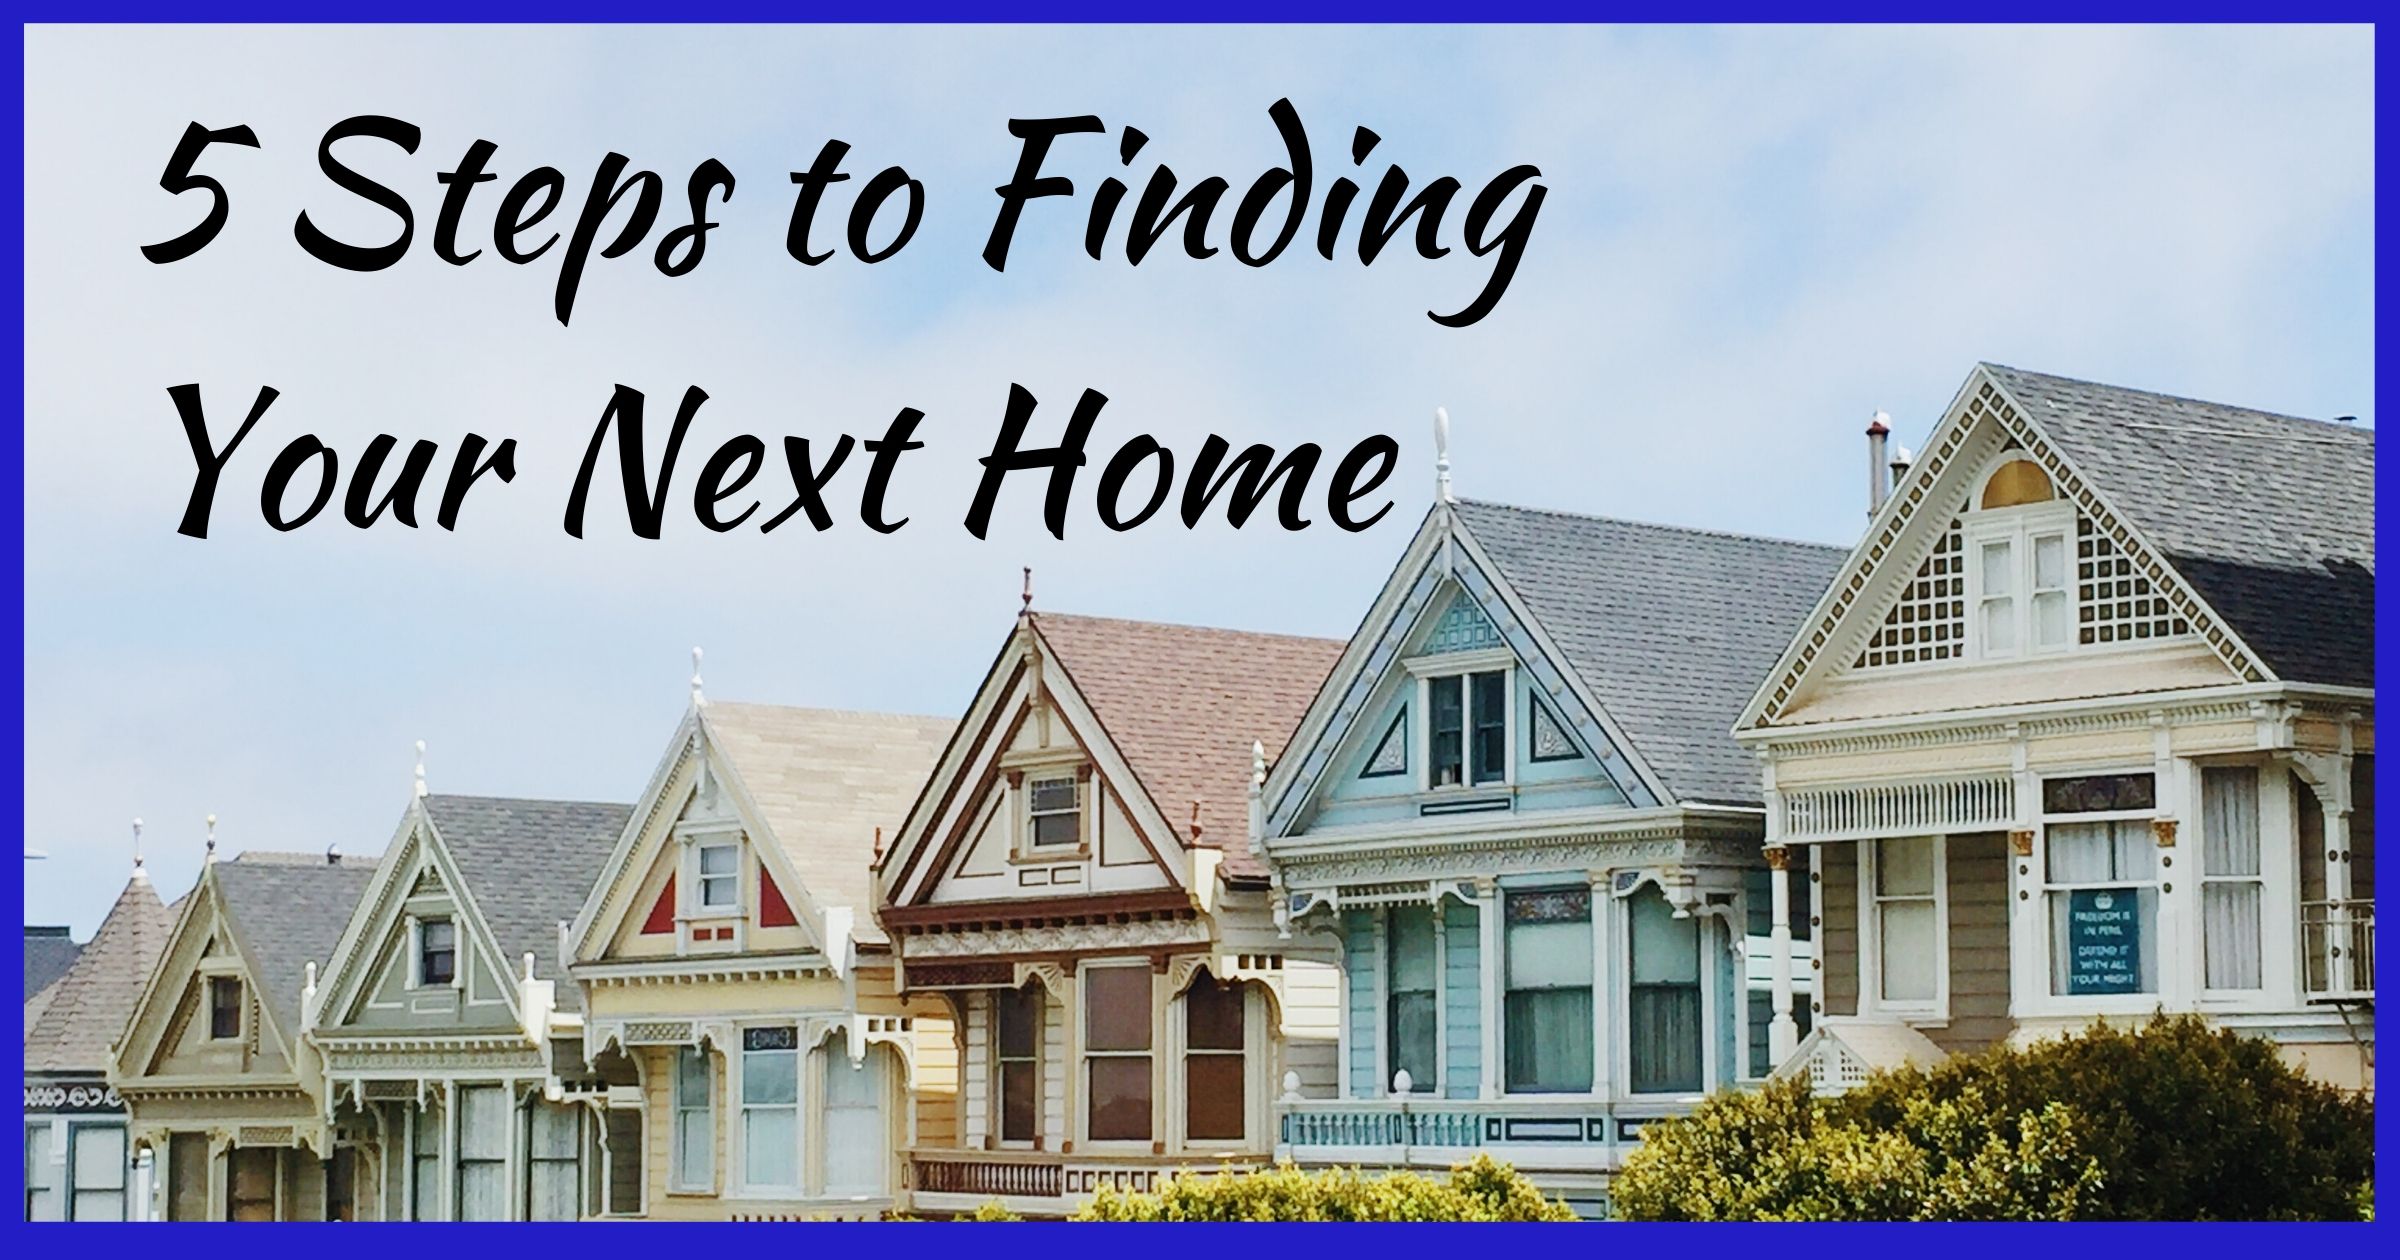 5 Steps to Finding Your Next Home SOCIAL